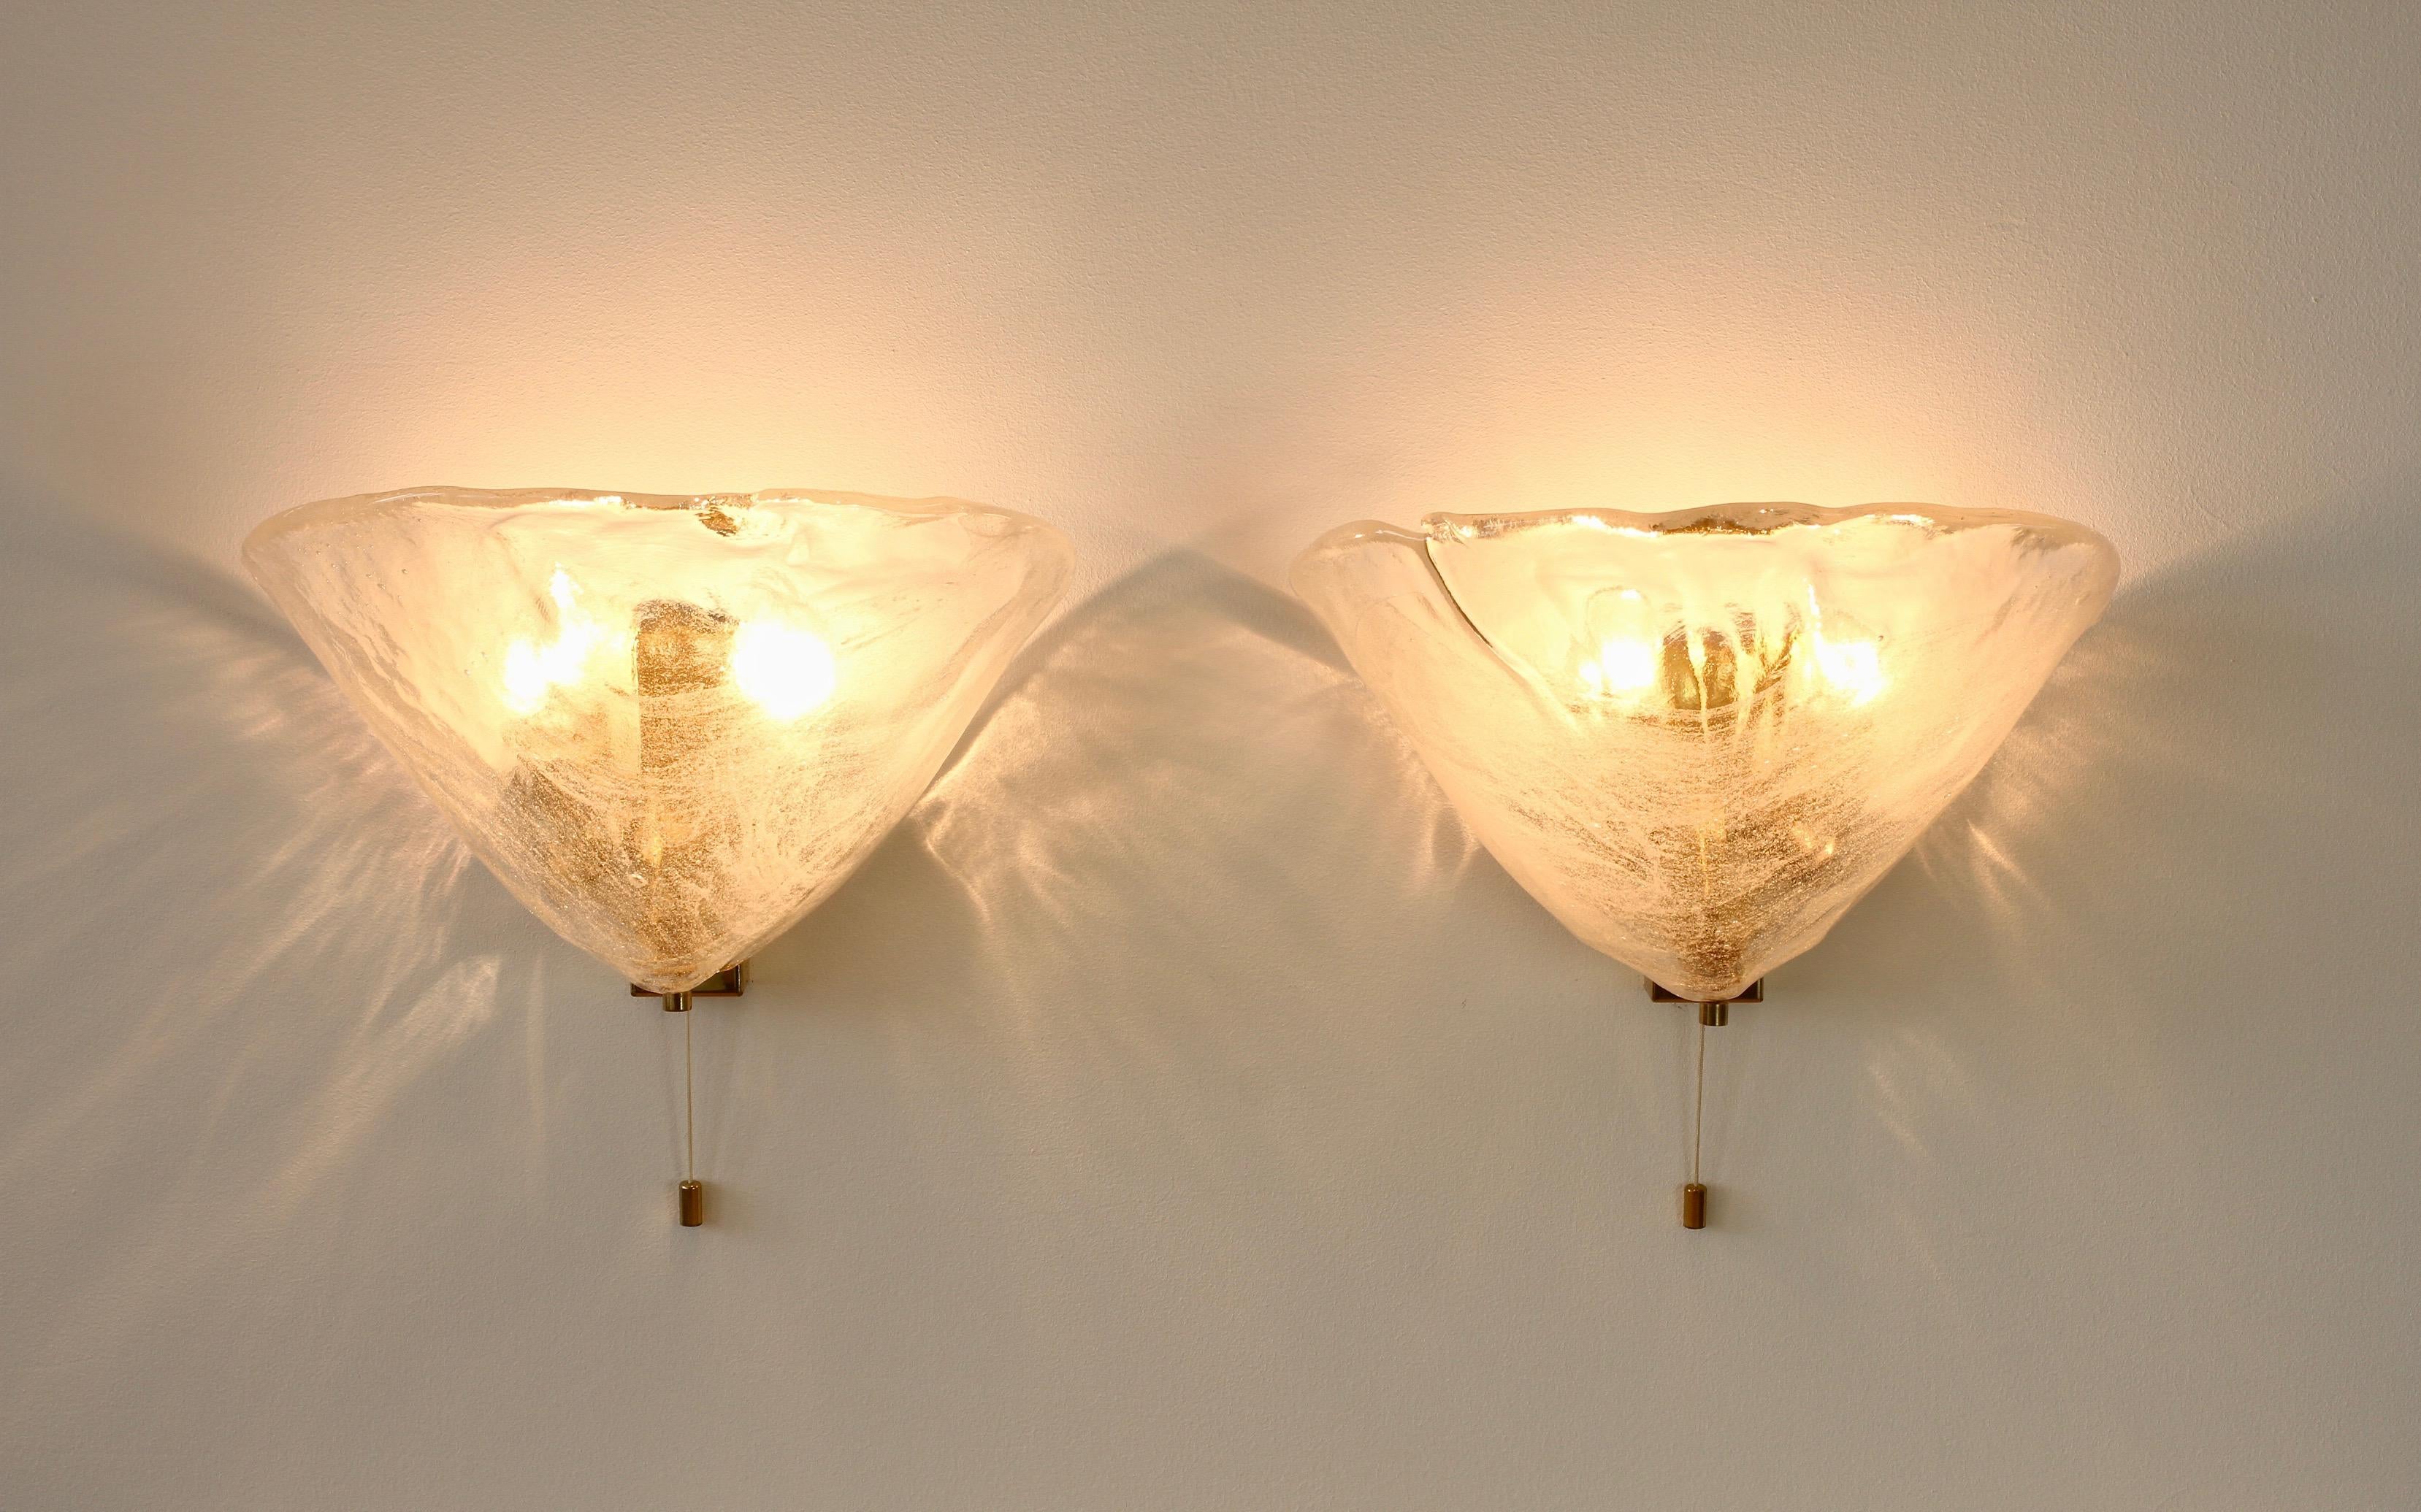 Large, elegant and rare pair of Austrian made melting ice glass wall sconces by Kalmar, circa 1960. Featuring two flower petal shaped glass elements, made by Italian Murano glass maker Mazzega, suspended on 24-karat gold-plated / gilt brass flush